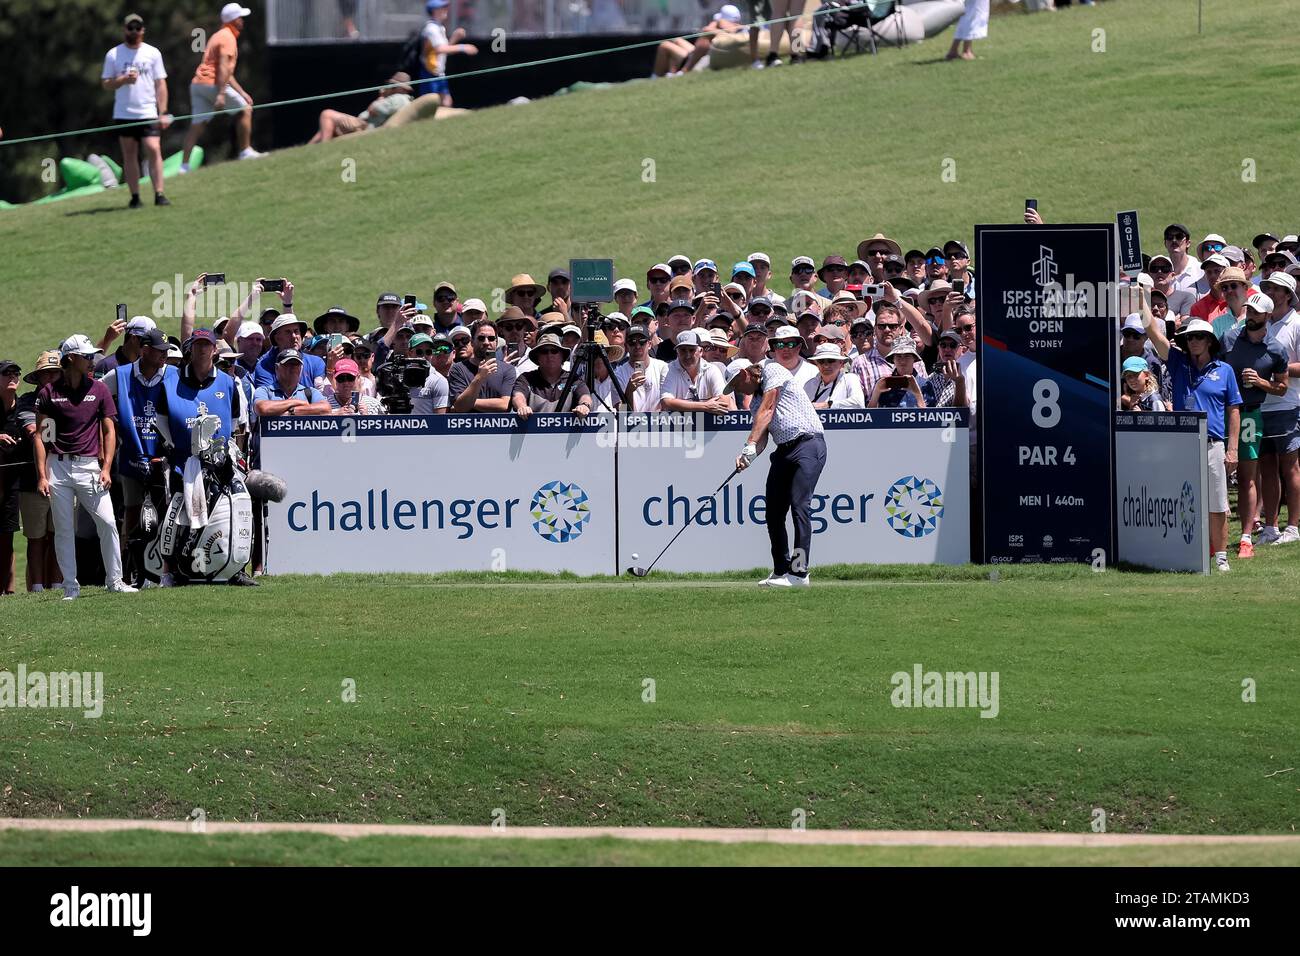 Sydney, Australia, 1 December, 2023. Cameron Smith tees off from the 8th hole during round 2 of The Australian Open Golf at The Australian Golf Club on December 01, 2023 in Sydney, Australia. Credit: Damian Briggs/Speed Media/Alamy Live News Stock Photo